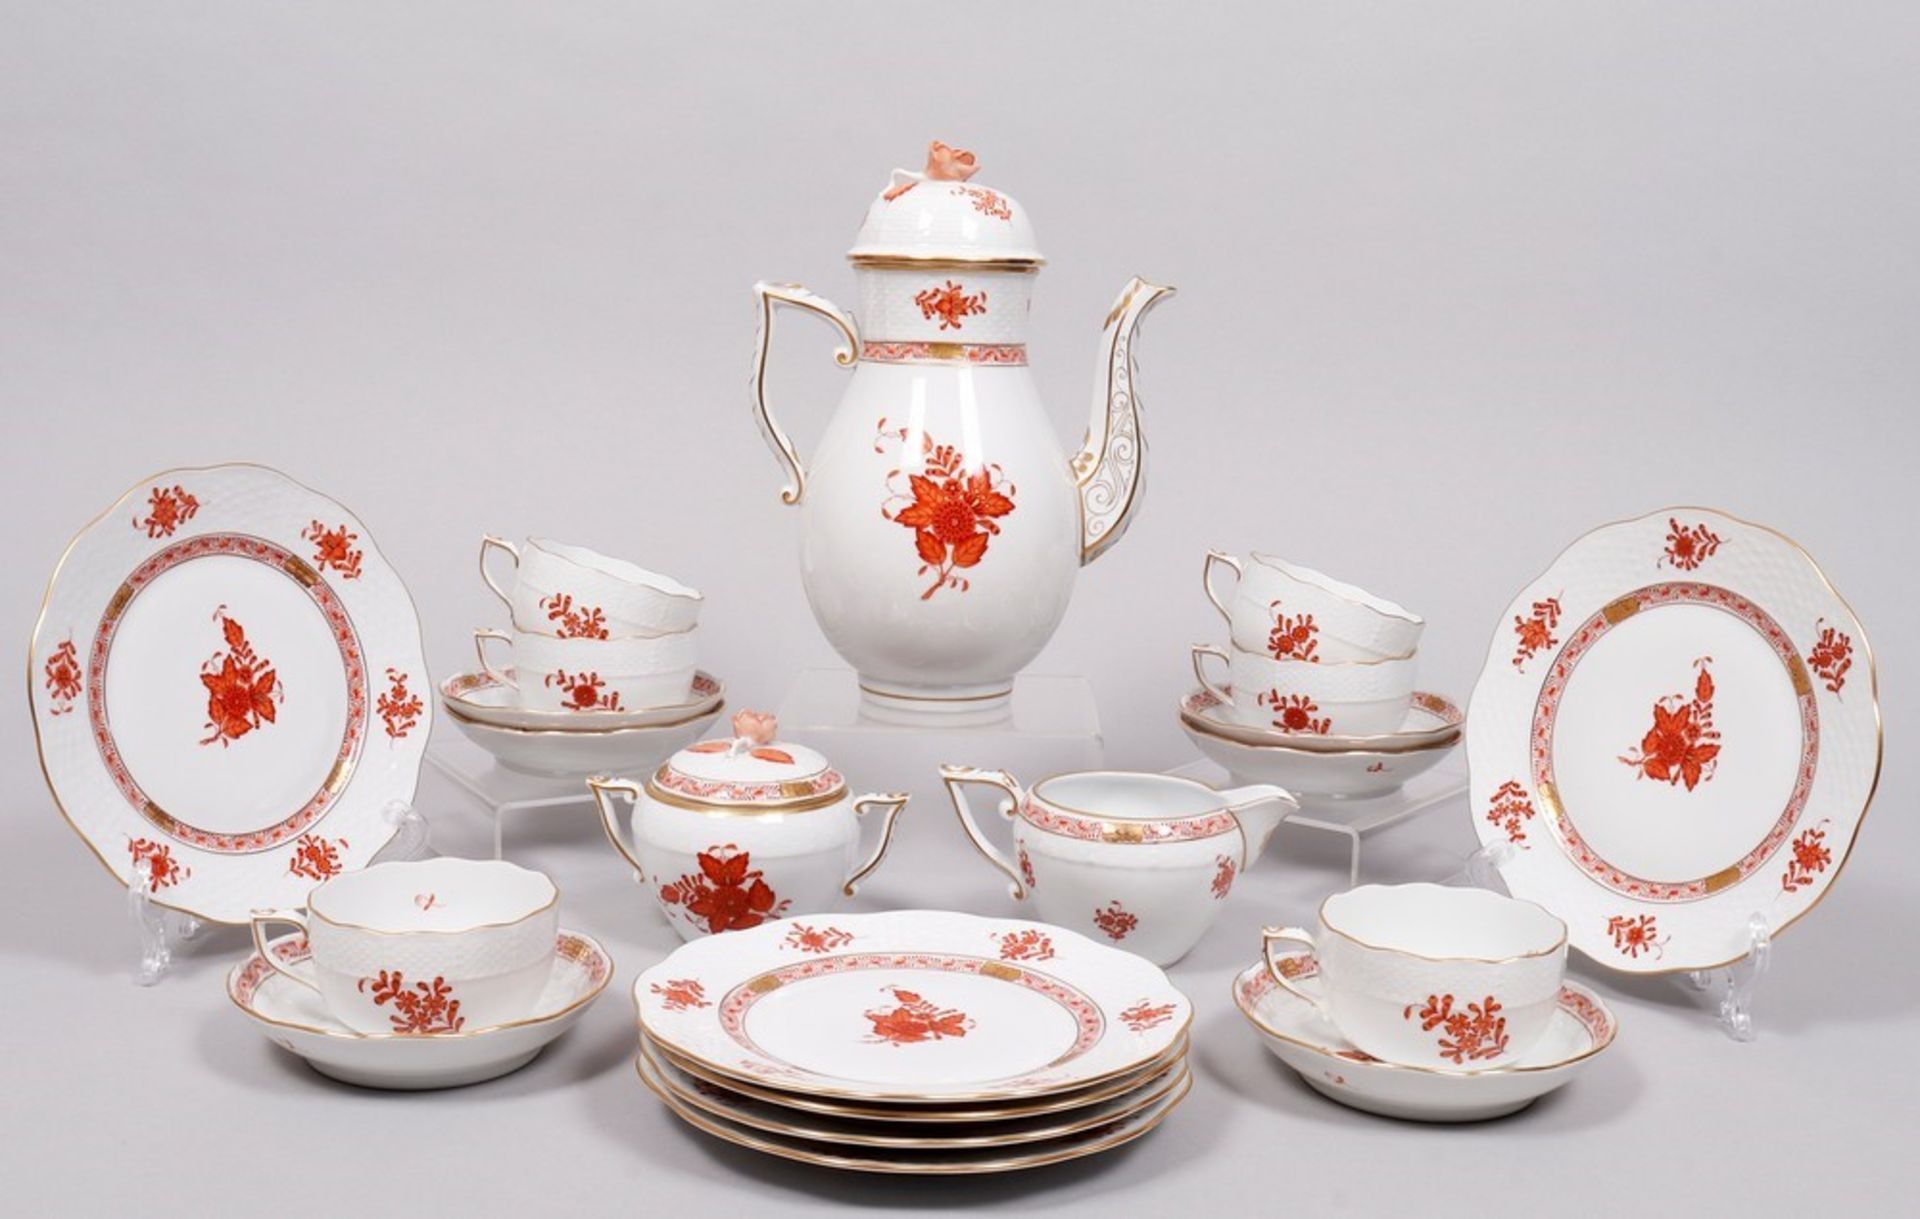 Coffee service for 6 persons, Herend, 20th C., 21 pieces